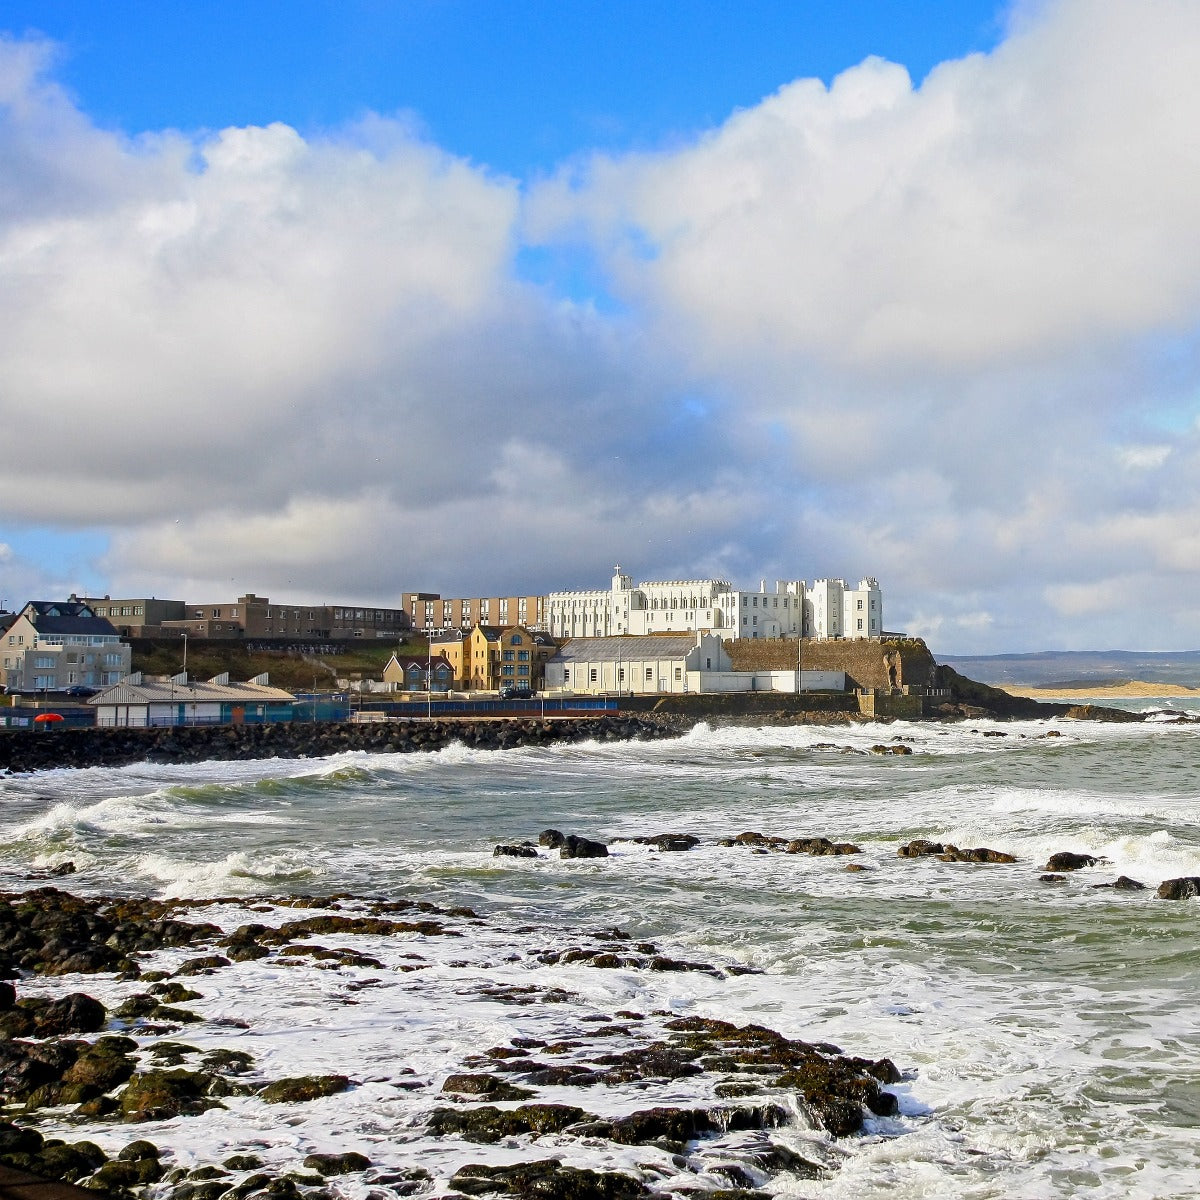 Looking at the Dominican College, Portstewart, over stormy seas, taken from the Promenade